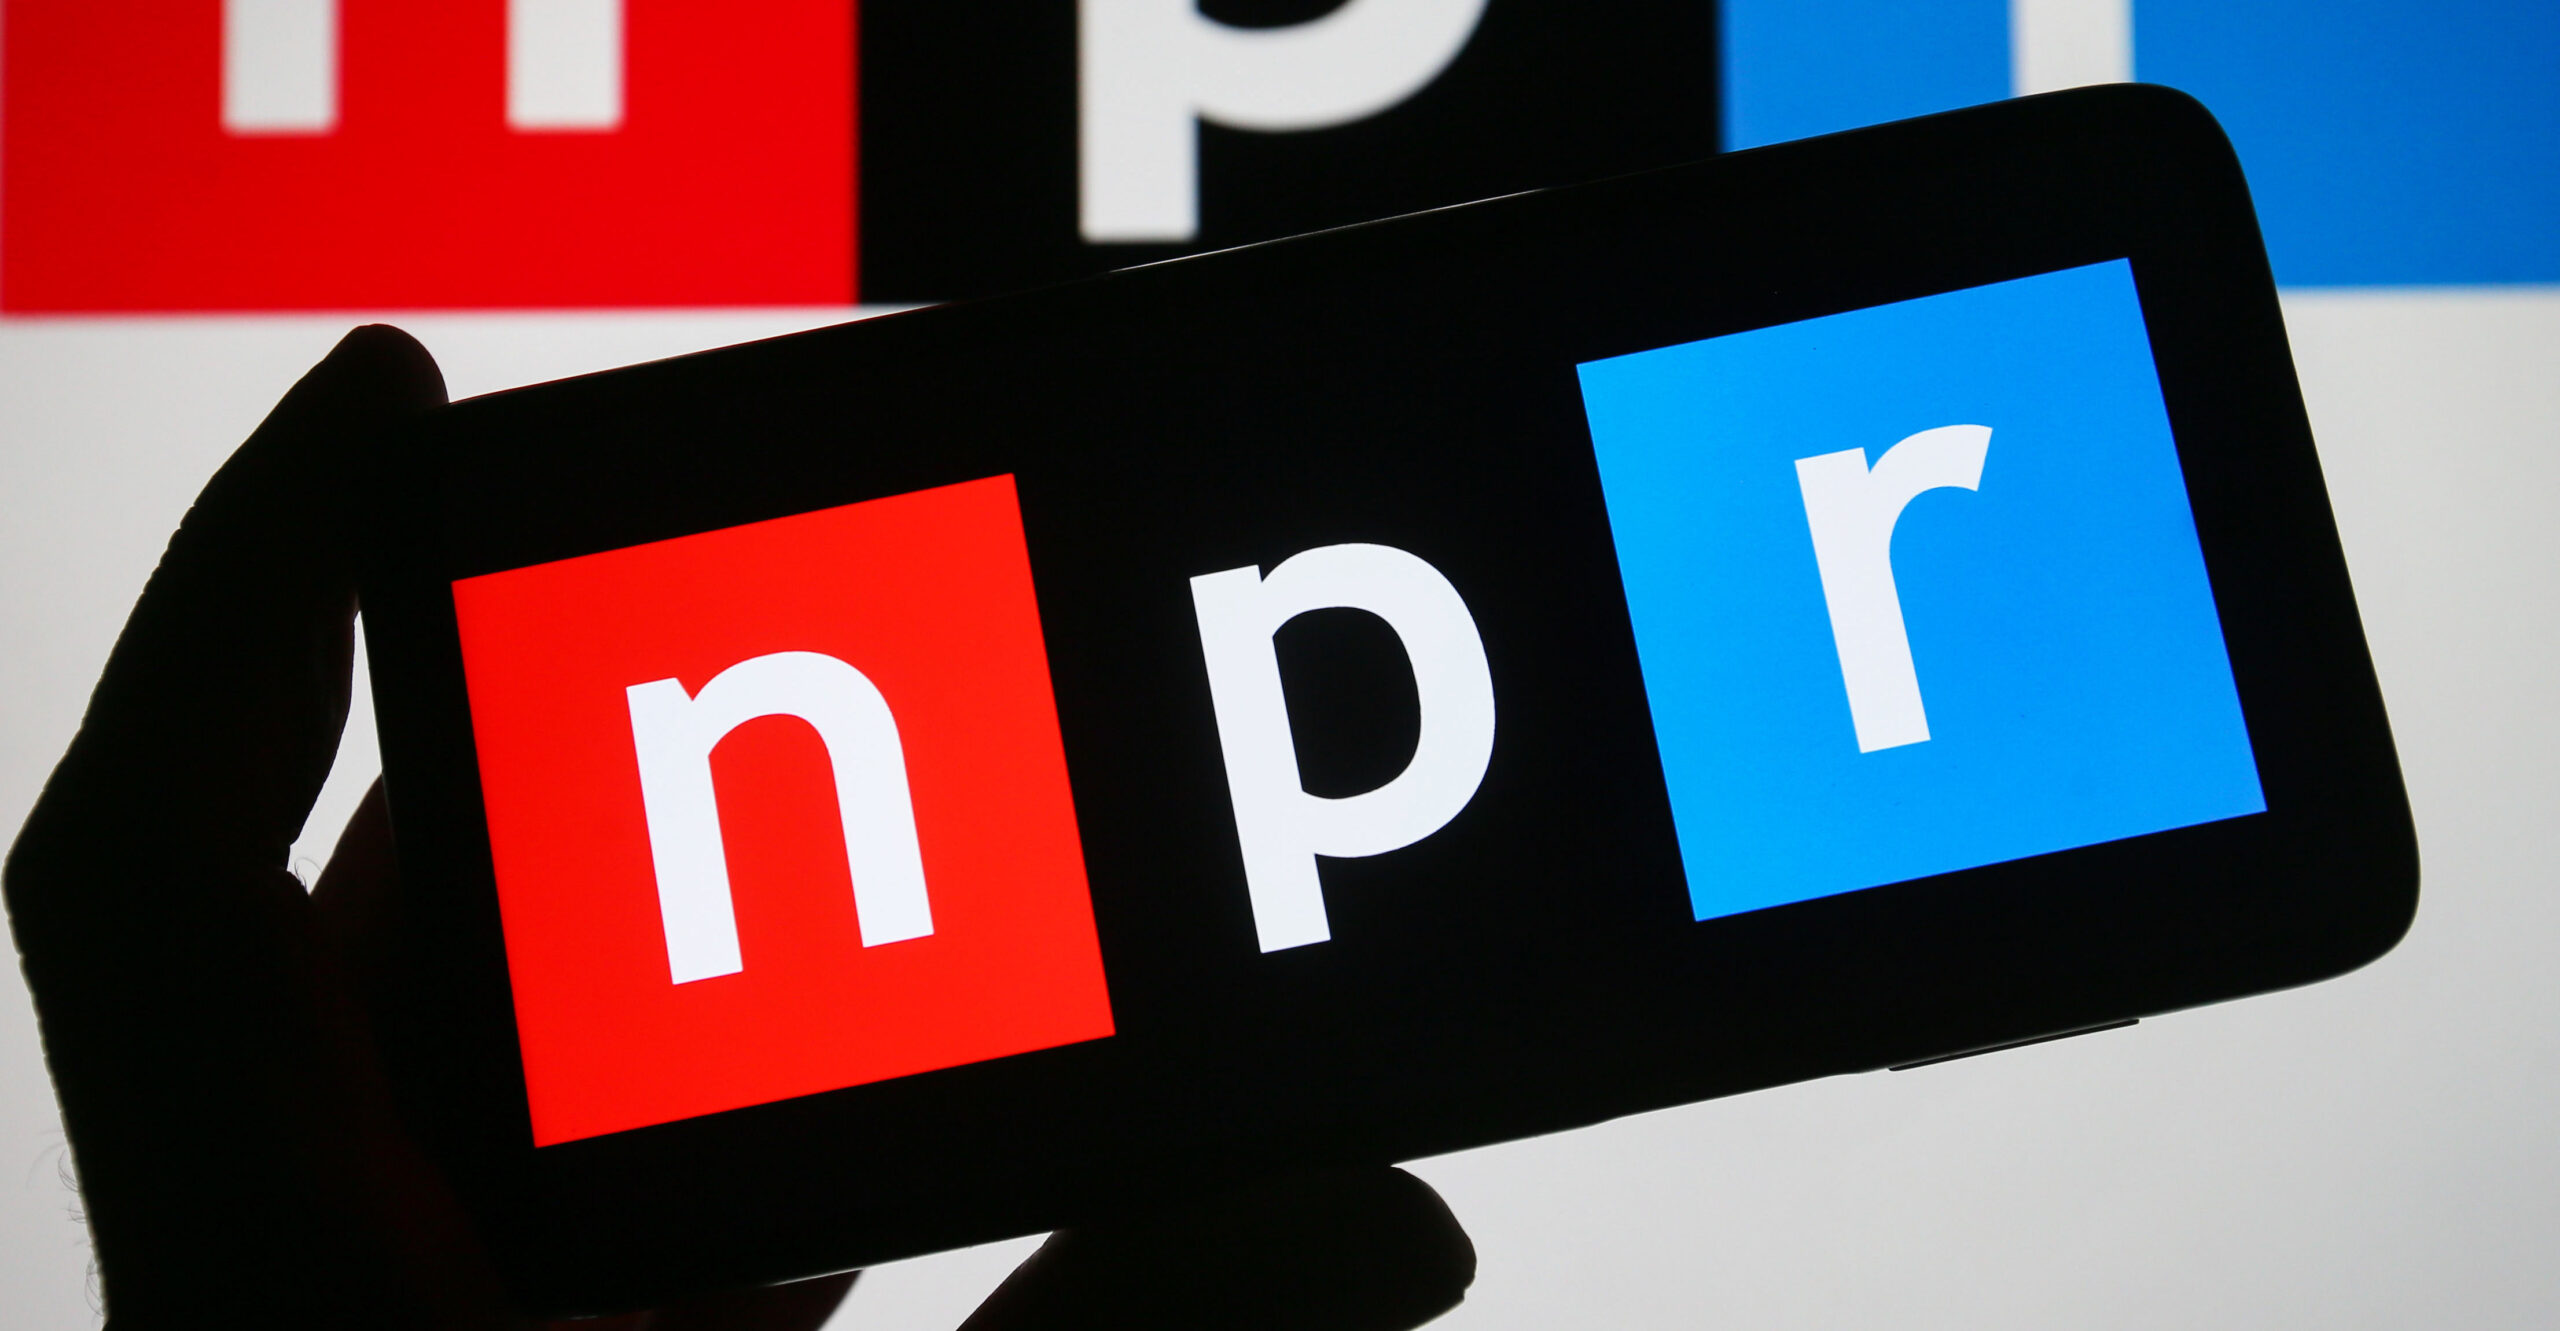 All (and Only) Left-Wing Things Considered at NPR, 25-Year Veteran Reveals